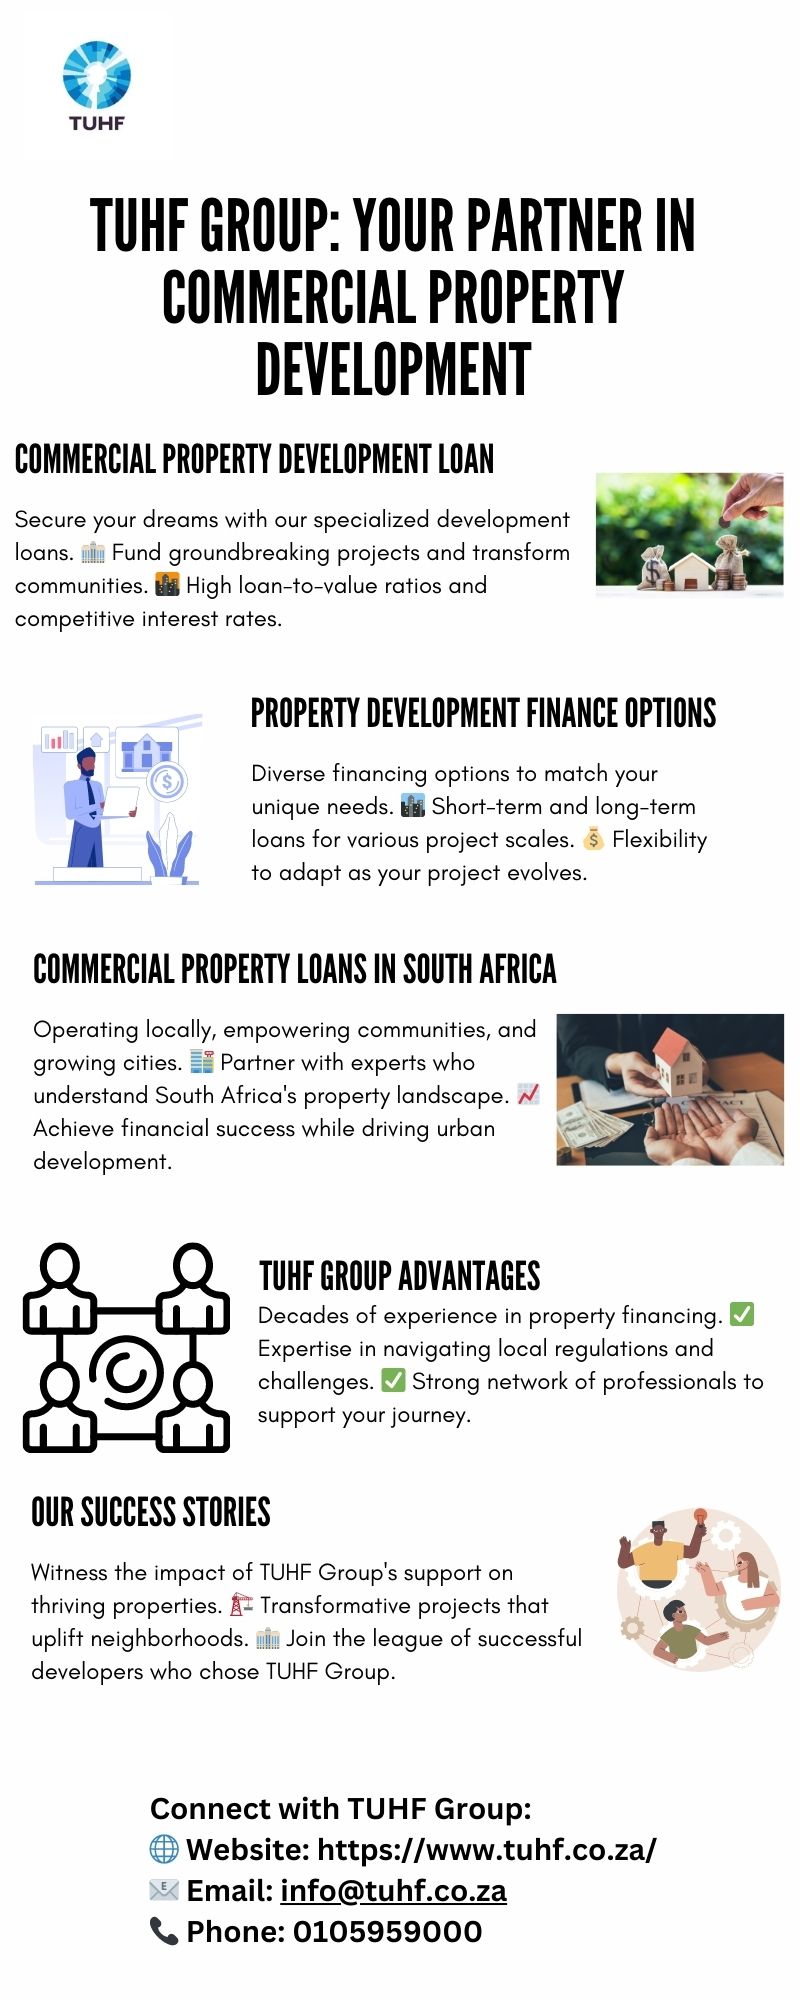 TUHF Group: Your Partner in Commercial Property Development - Social Social Social | Social Social Social